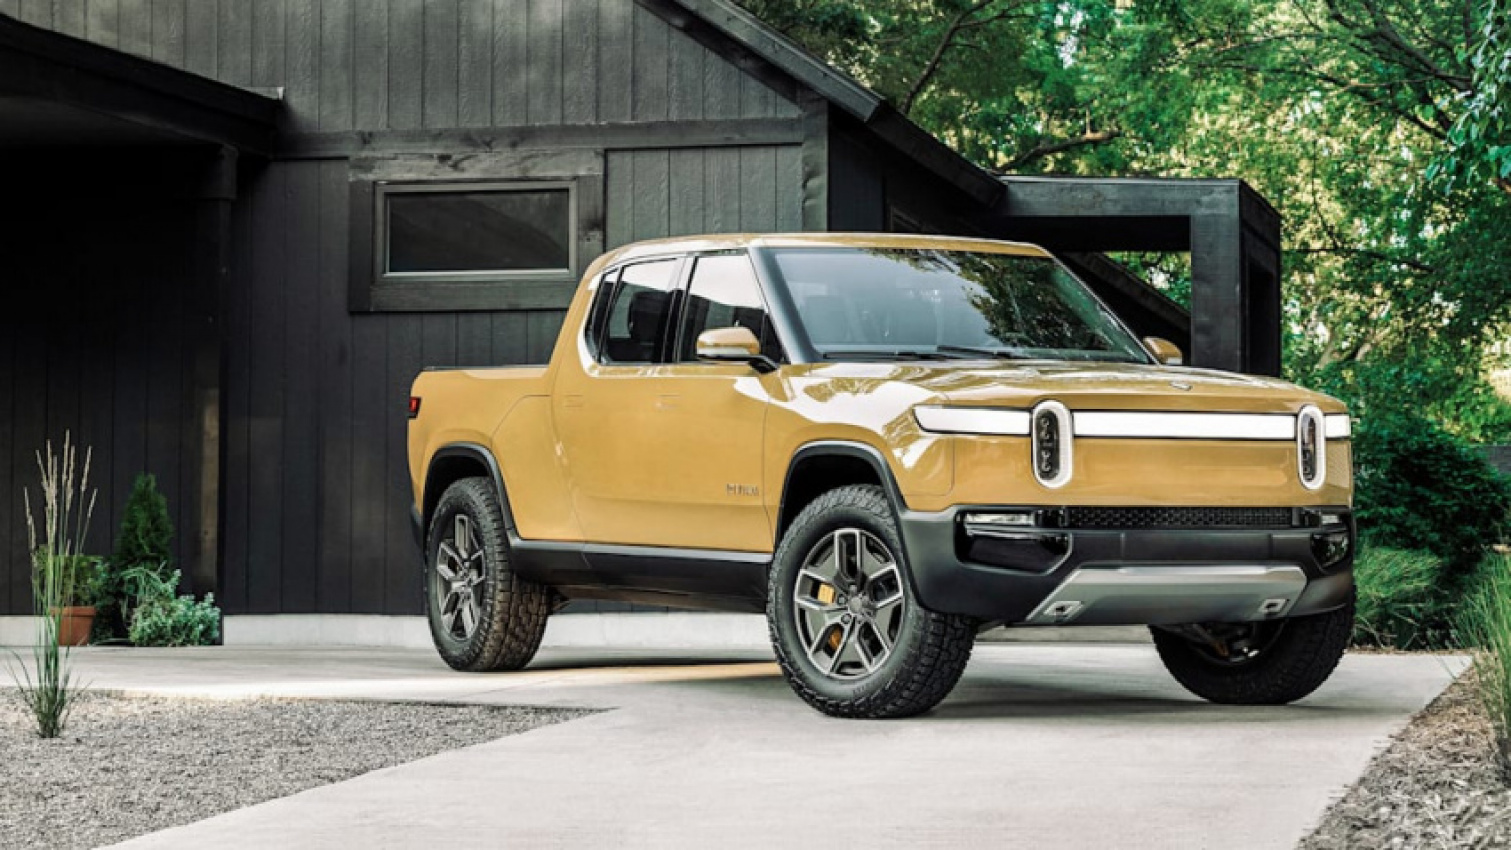 autos, cars, green, rivian, electric, off-road vehicles, truck, rivian backtracks on reservation holders' price increases after outcry